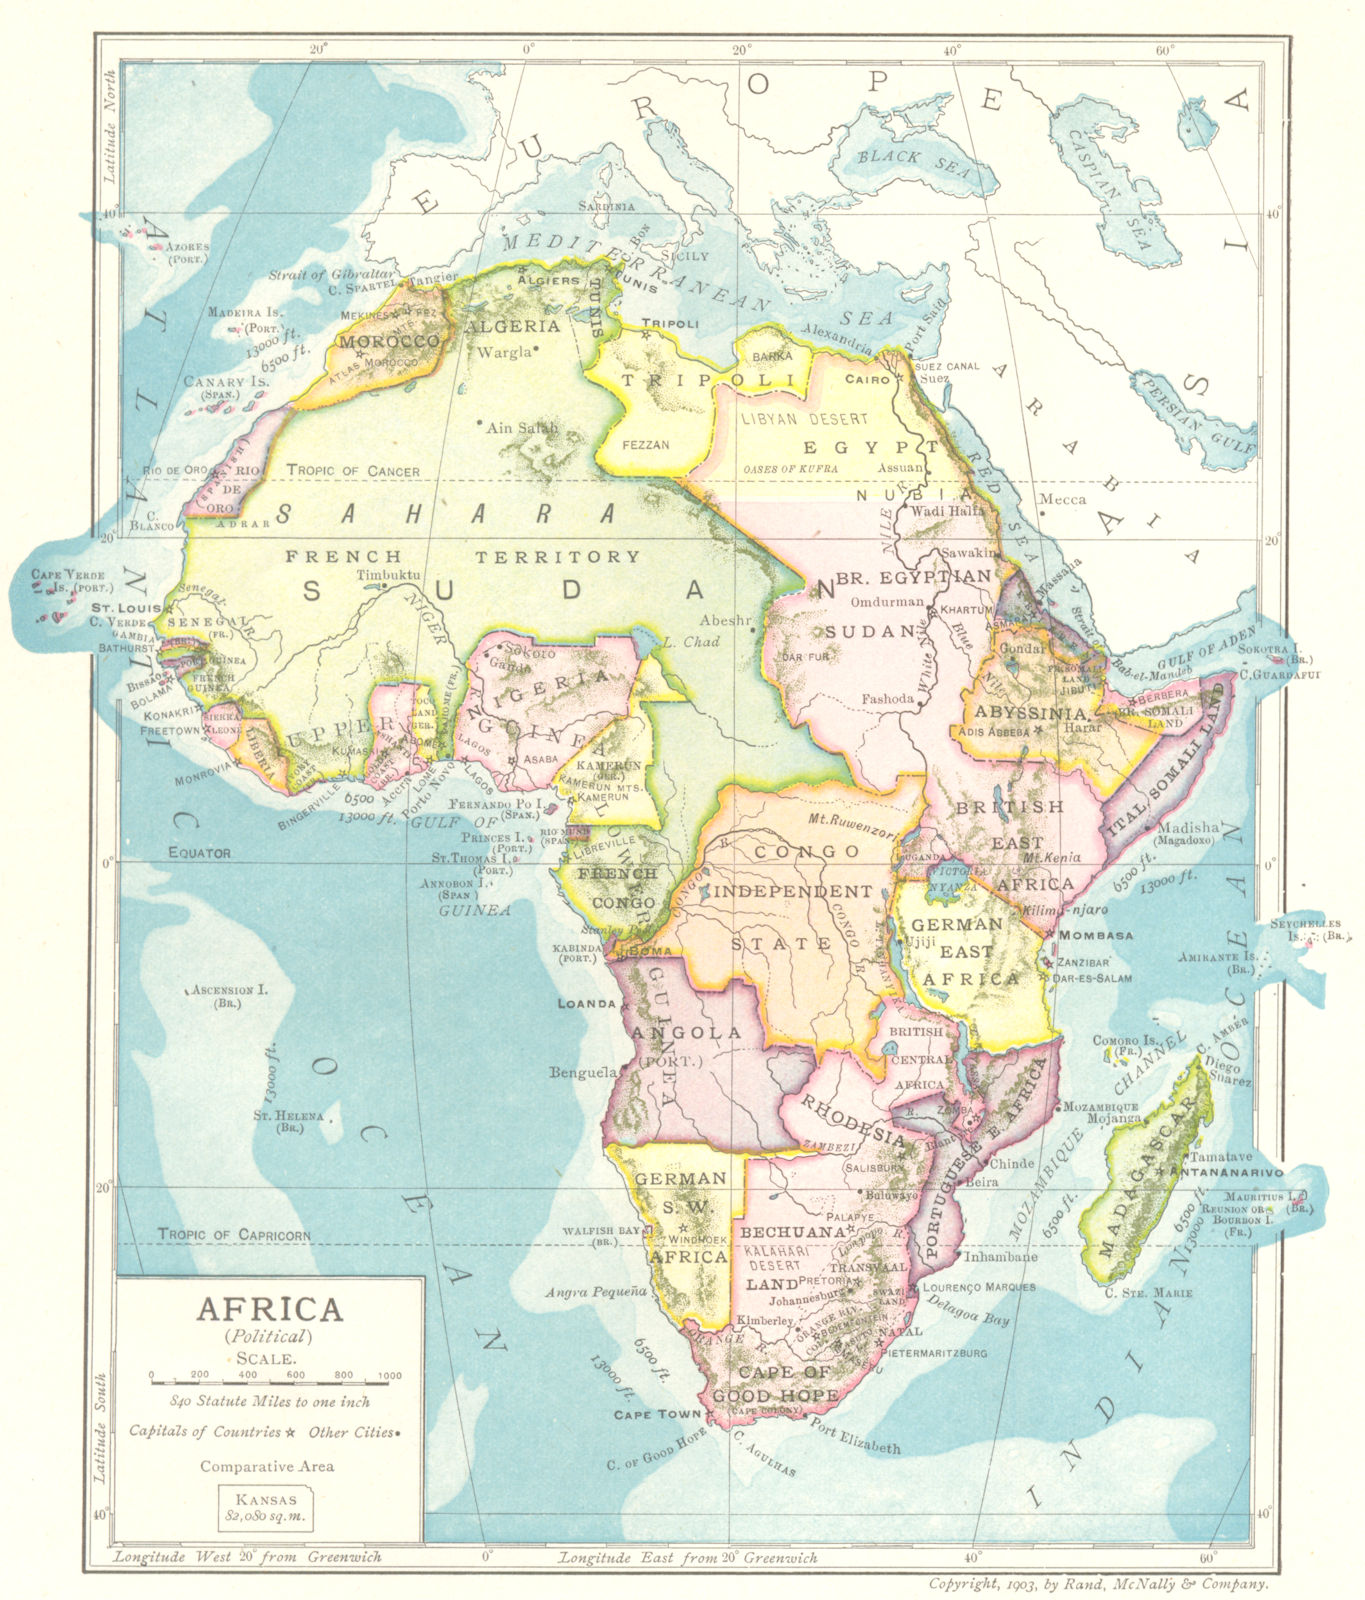 COLONIAL AFRICA. Abyssinia British East Africa Rhodesia French Sudan 1907 map